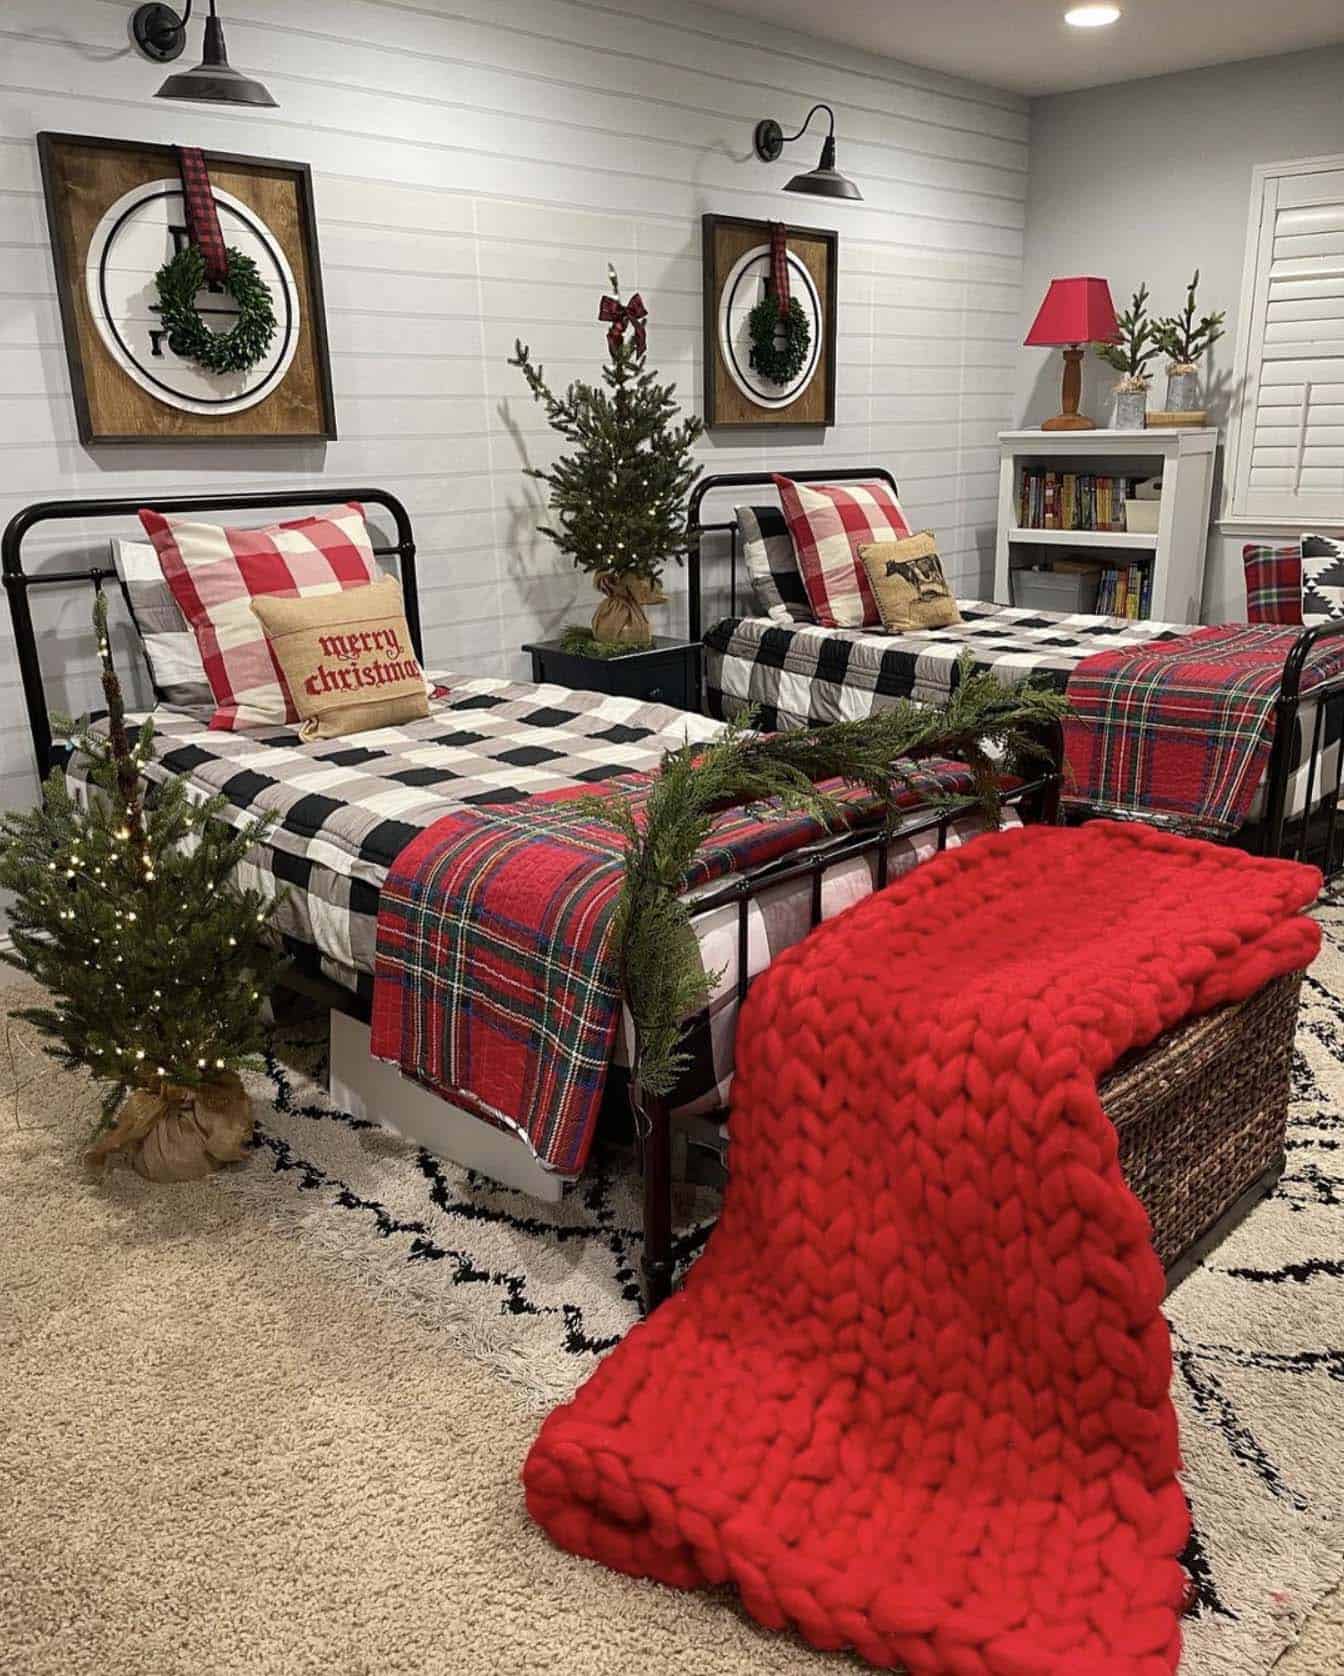 boy's bedroom decorated for Christmas with plaid bedding and a red chunky knit throw